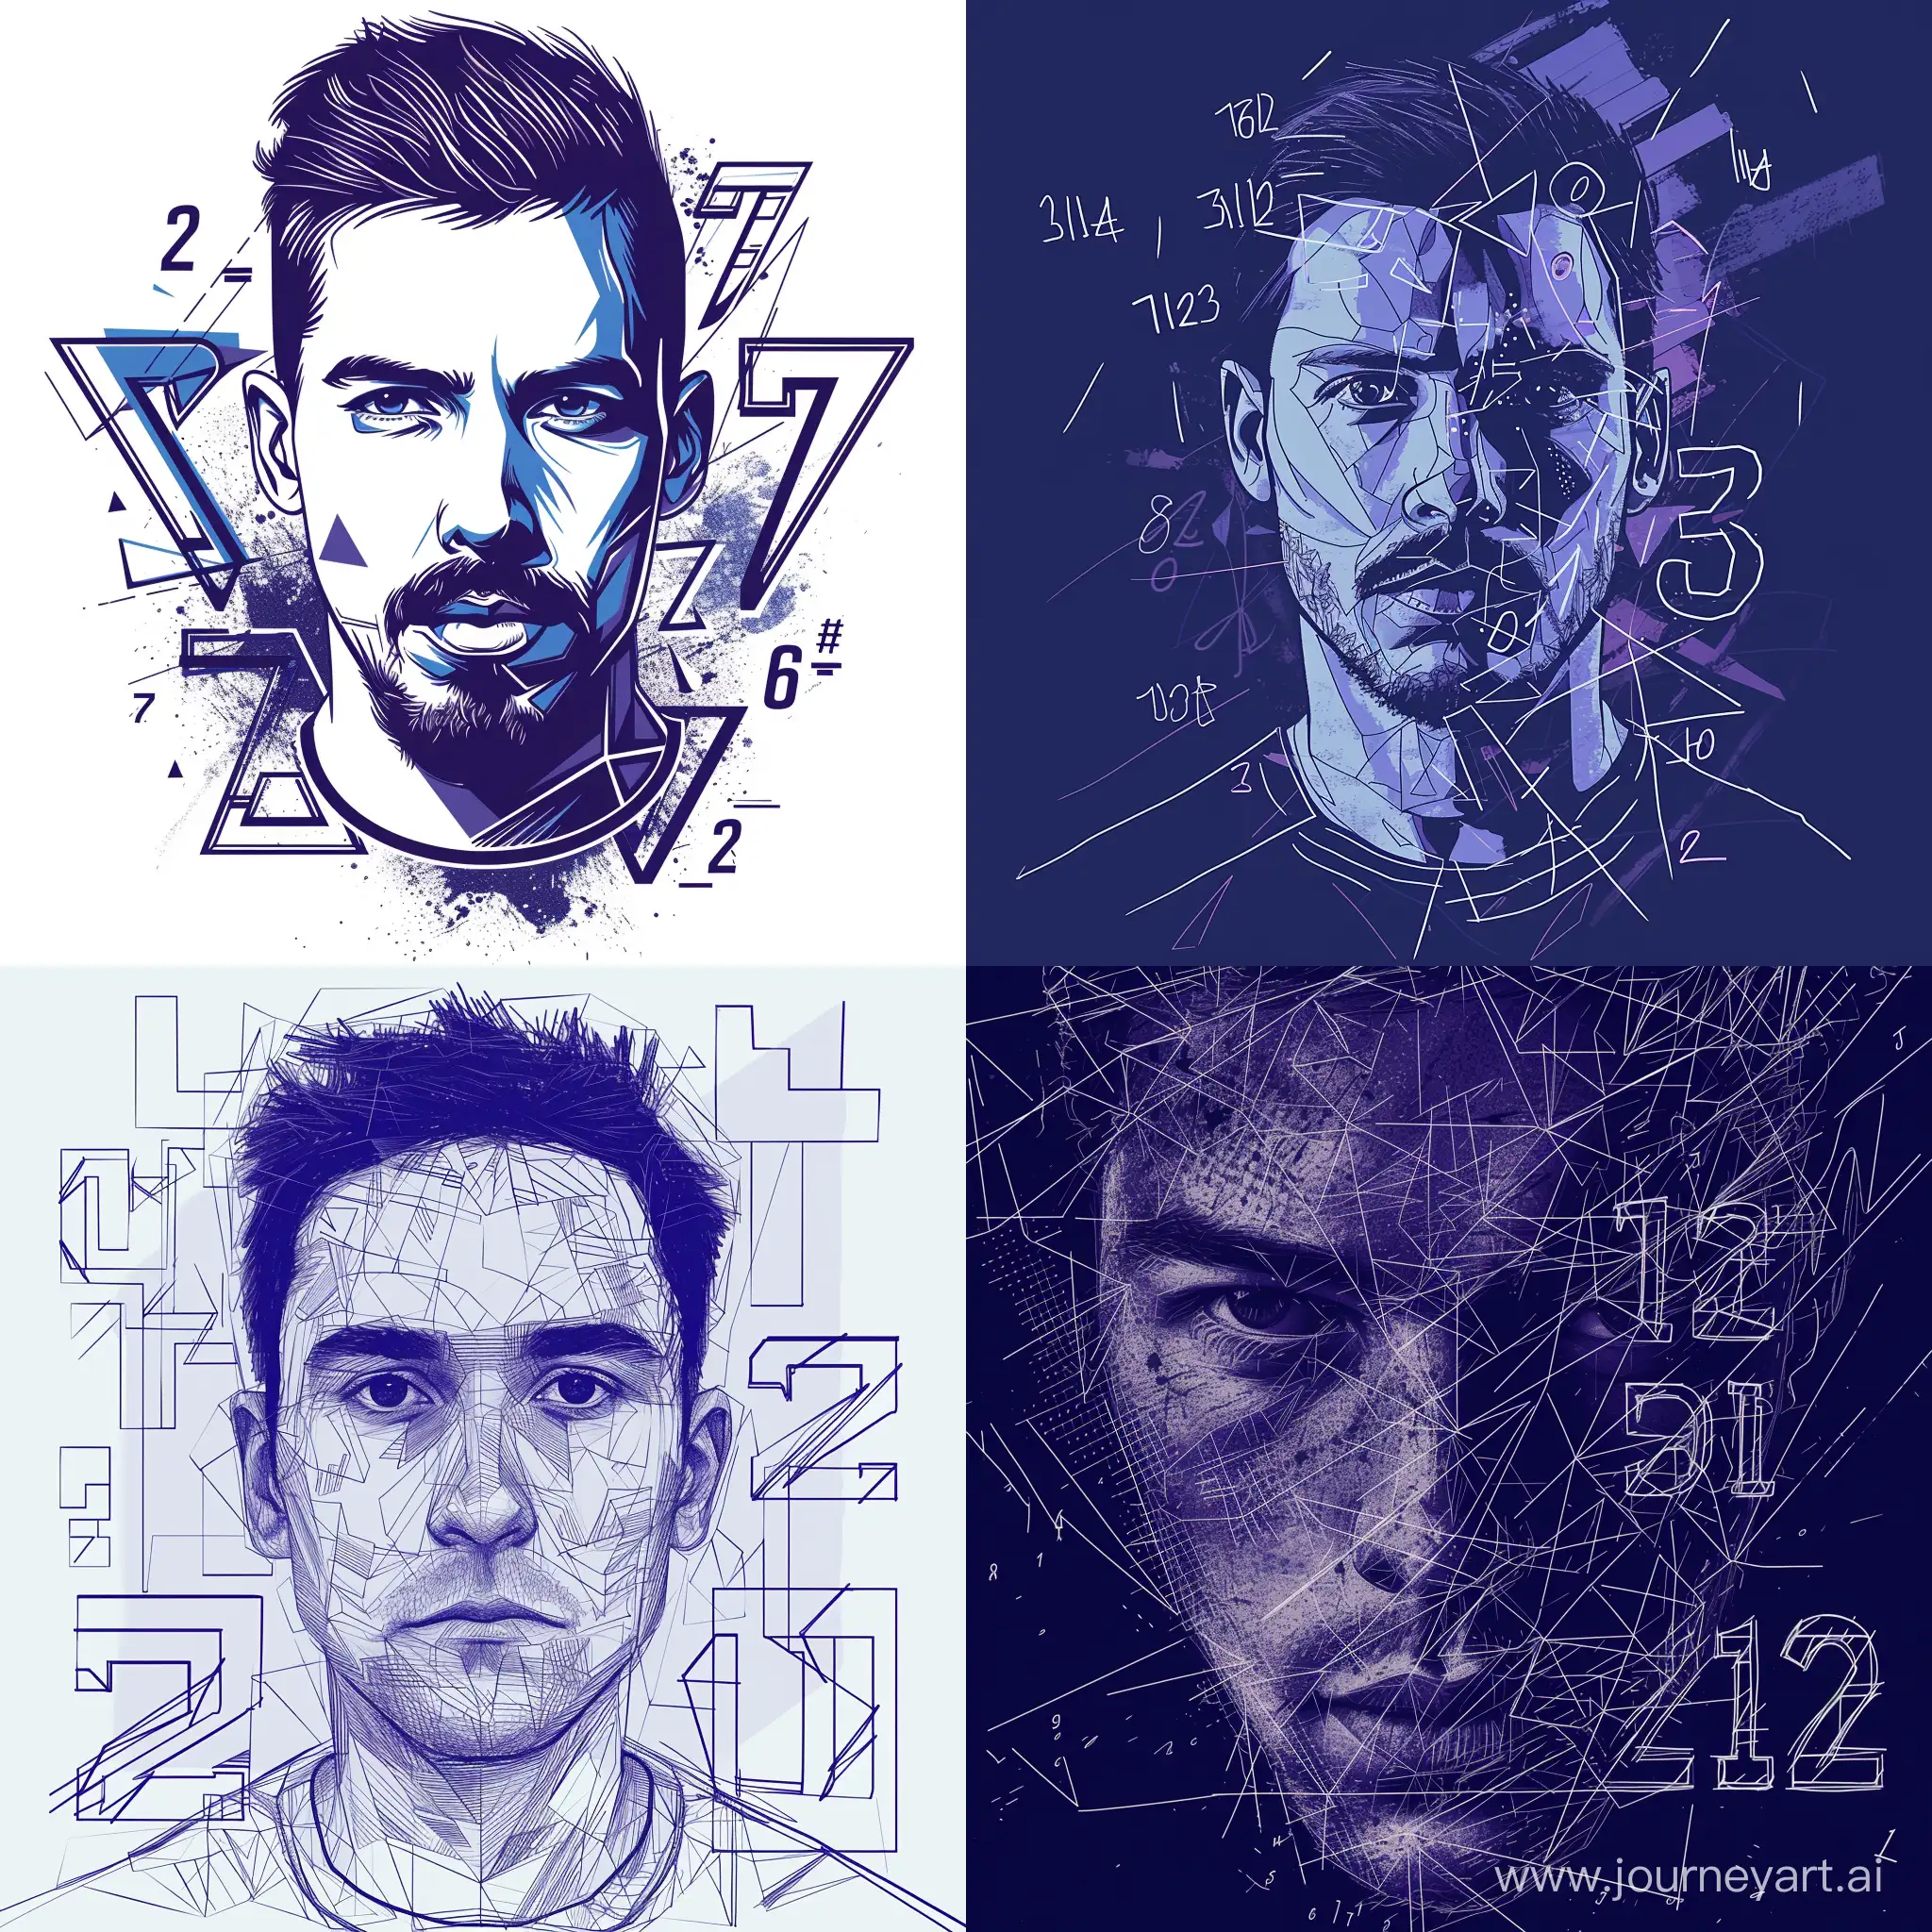 Geometric-Avatar-with-Indigo-Coloring-for-Social-Network-Profile